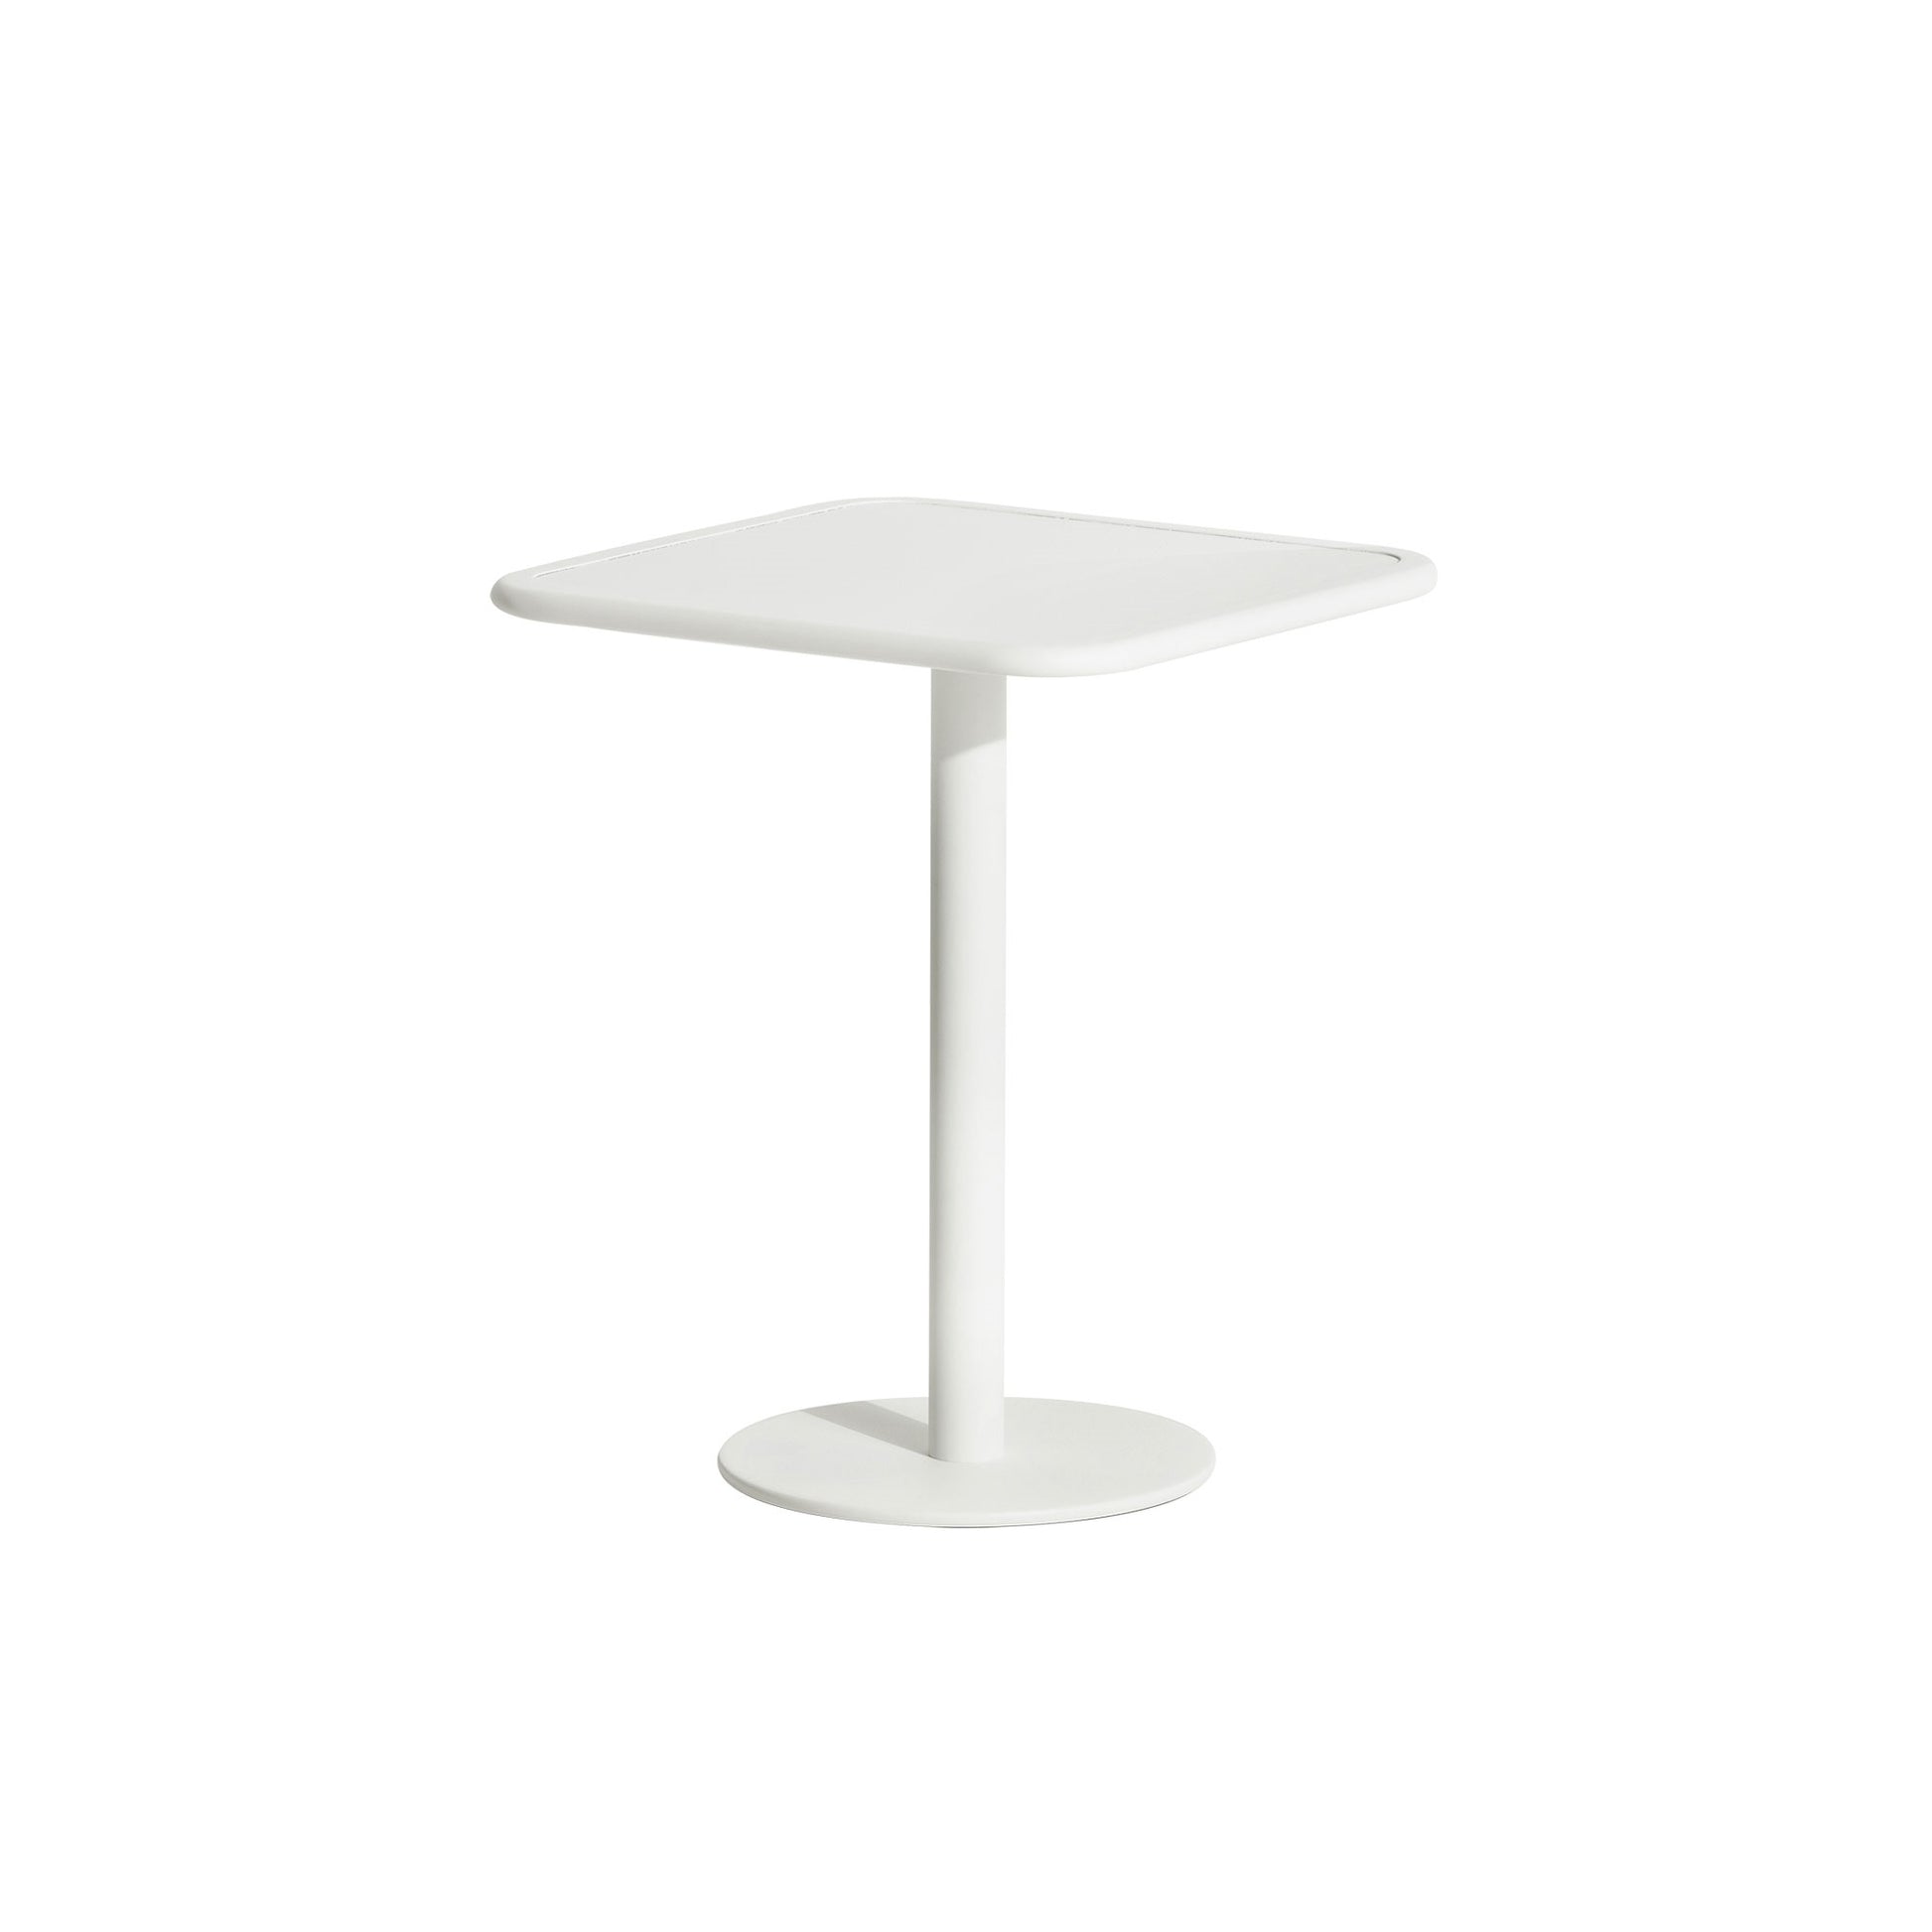 WEEK-END Square Café Table by Petite Friture #White